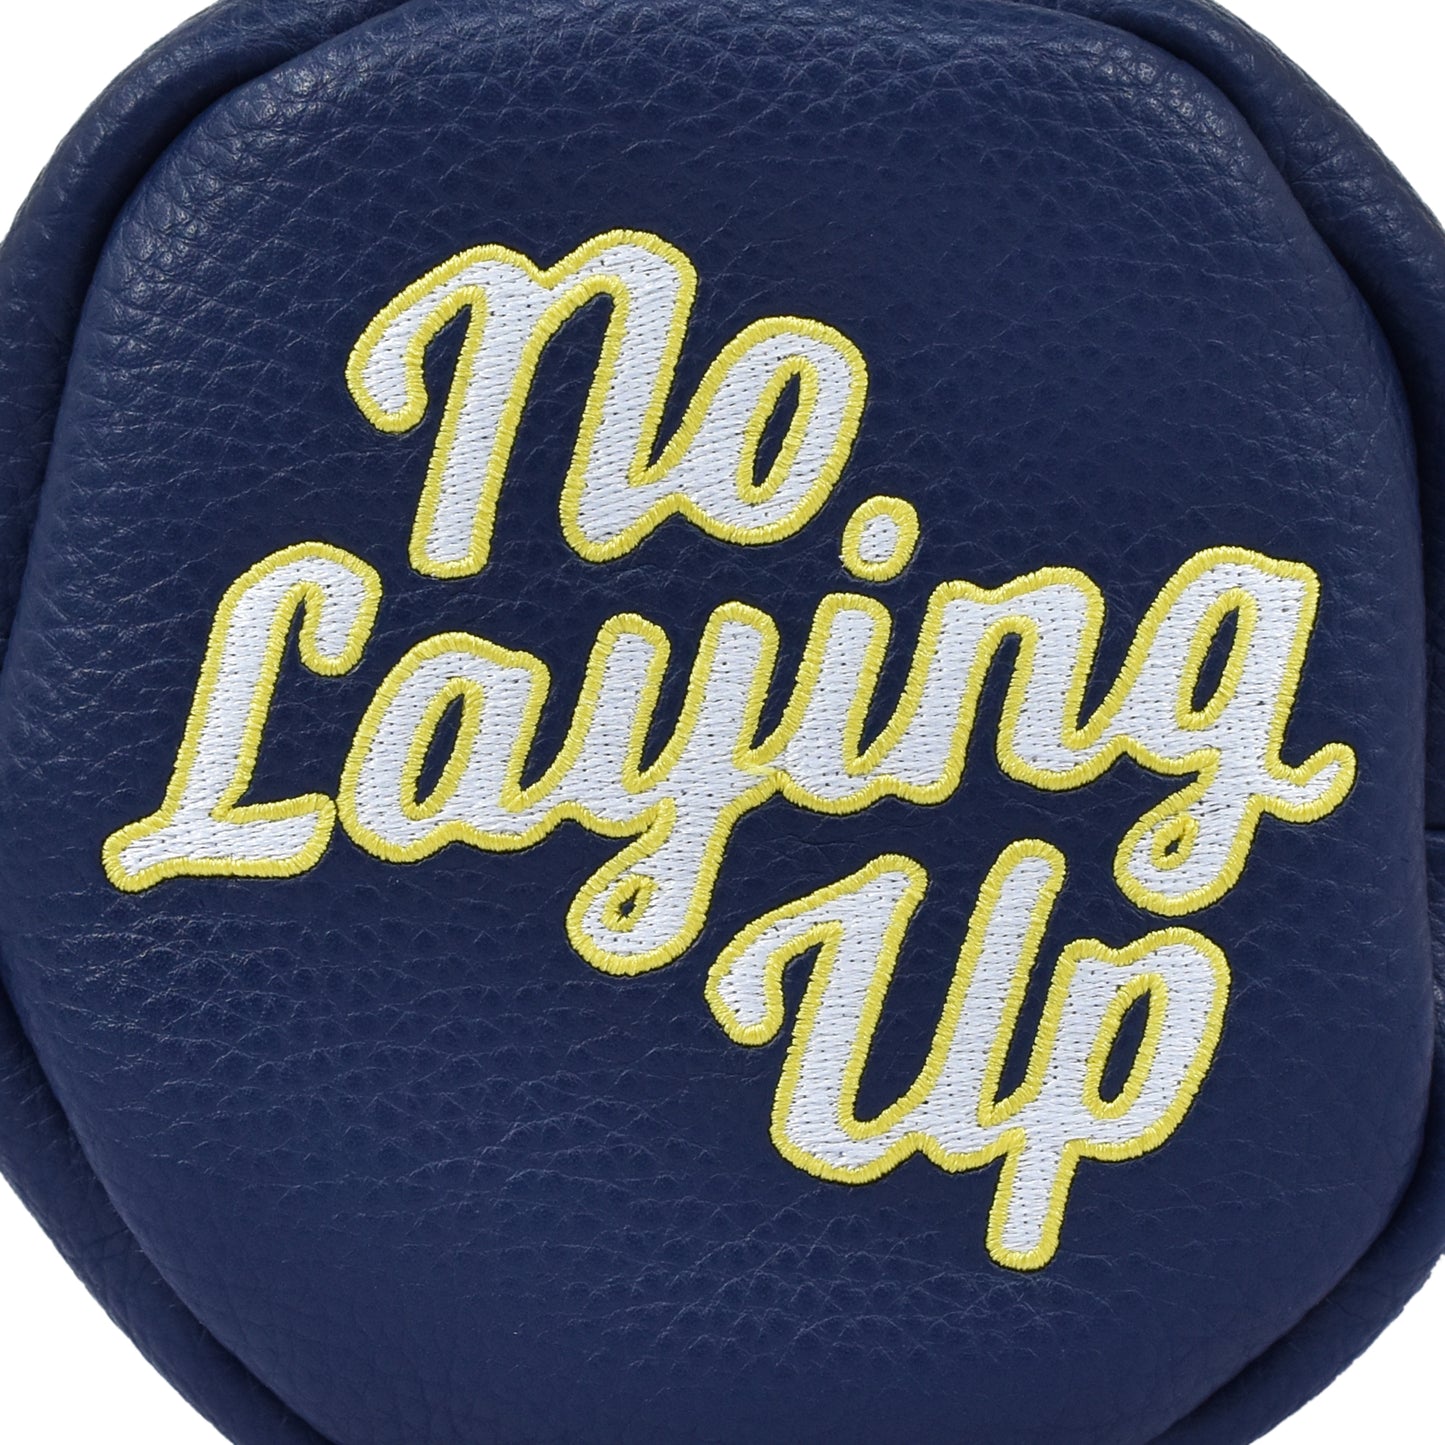 No Laying Up Barrel Driver Headcover | Navy w/ White and Yellow